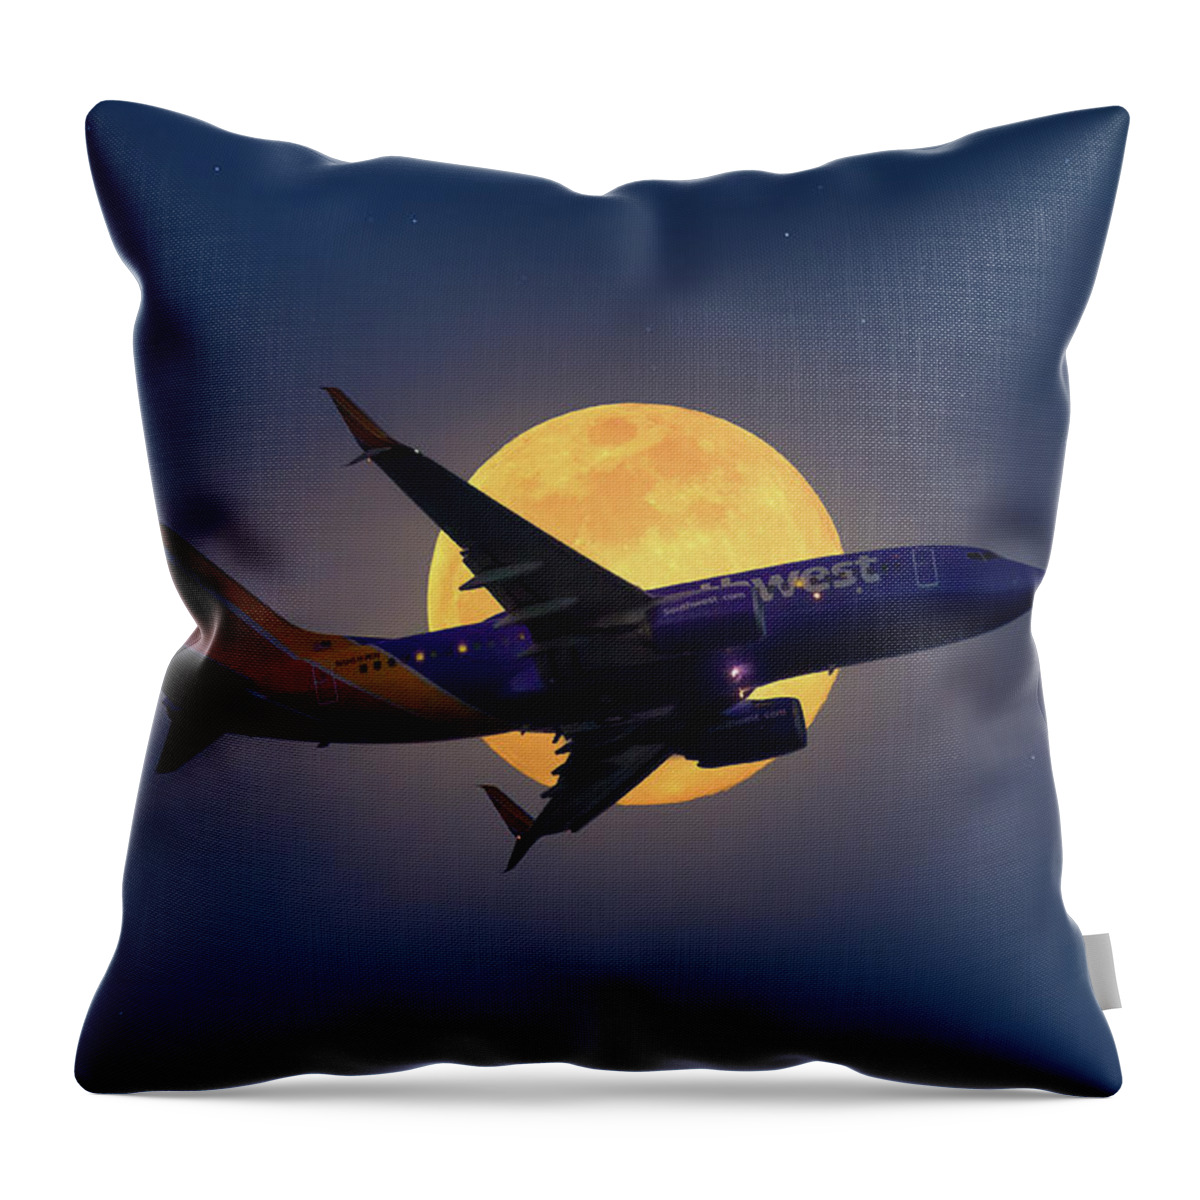 Moon Throw Pillow featuring the photograph Flight Over the Moon by Mark Andrew Thomas